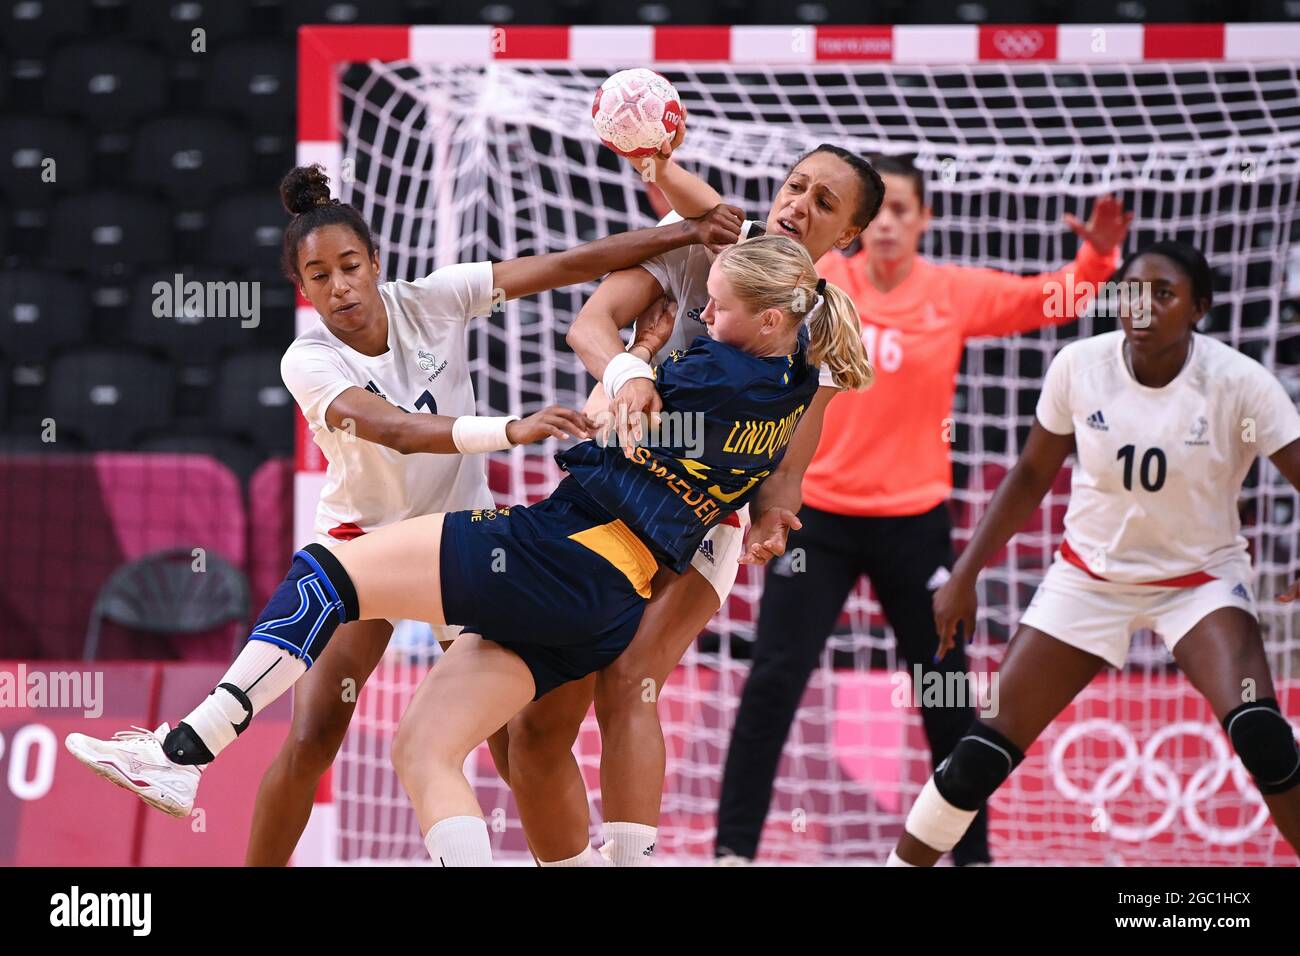 Tokyo, Japan. 6th Aug, 2021. Emma Lindqvist (3rd L) of Sweden vies for the ball during the handball women's semifinal between France and Sweden at the Tokyo 2020 Olympic Games in Tokyo, Japan, Aug. 6, 2021. Credit: Guo Chen/Xinhua/Alamy Live News Stock Photo